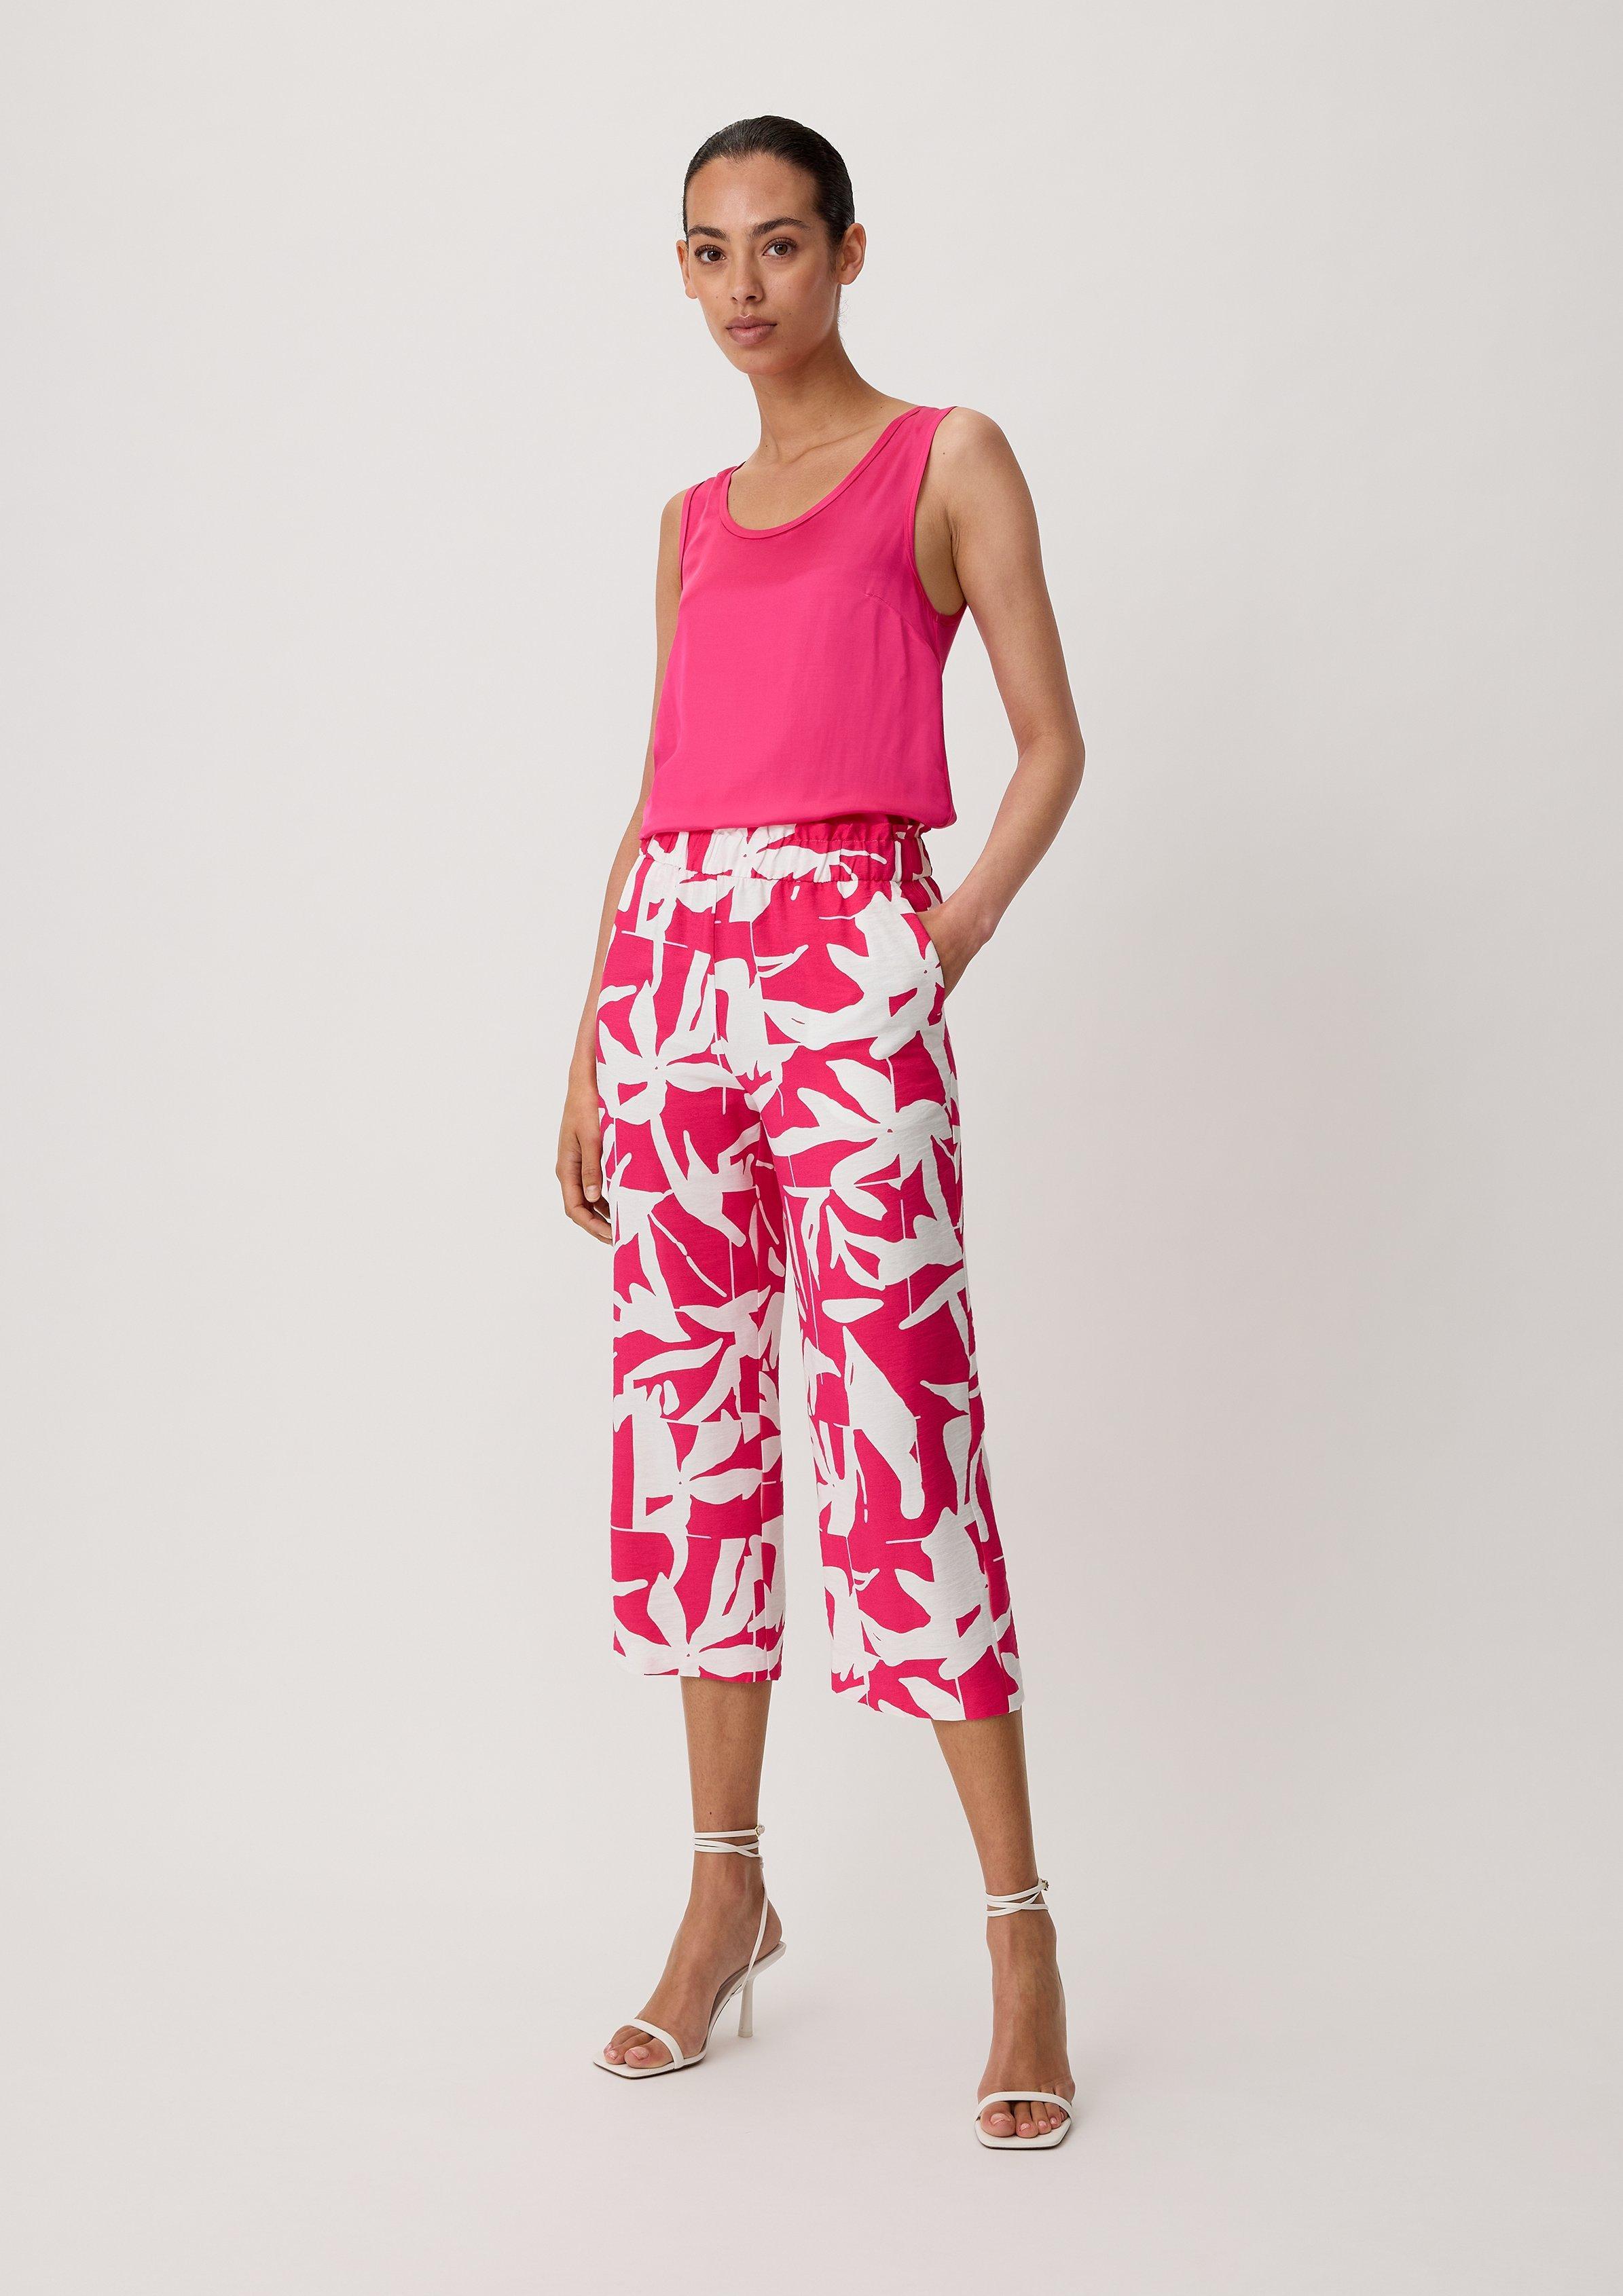 mit | - Loose: pink Allover-Print Hose Comma